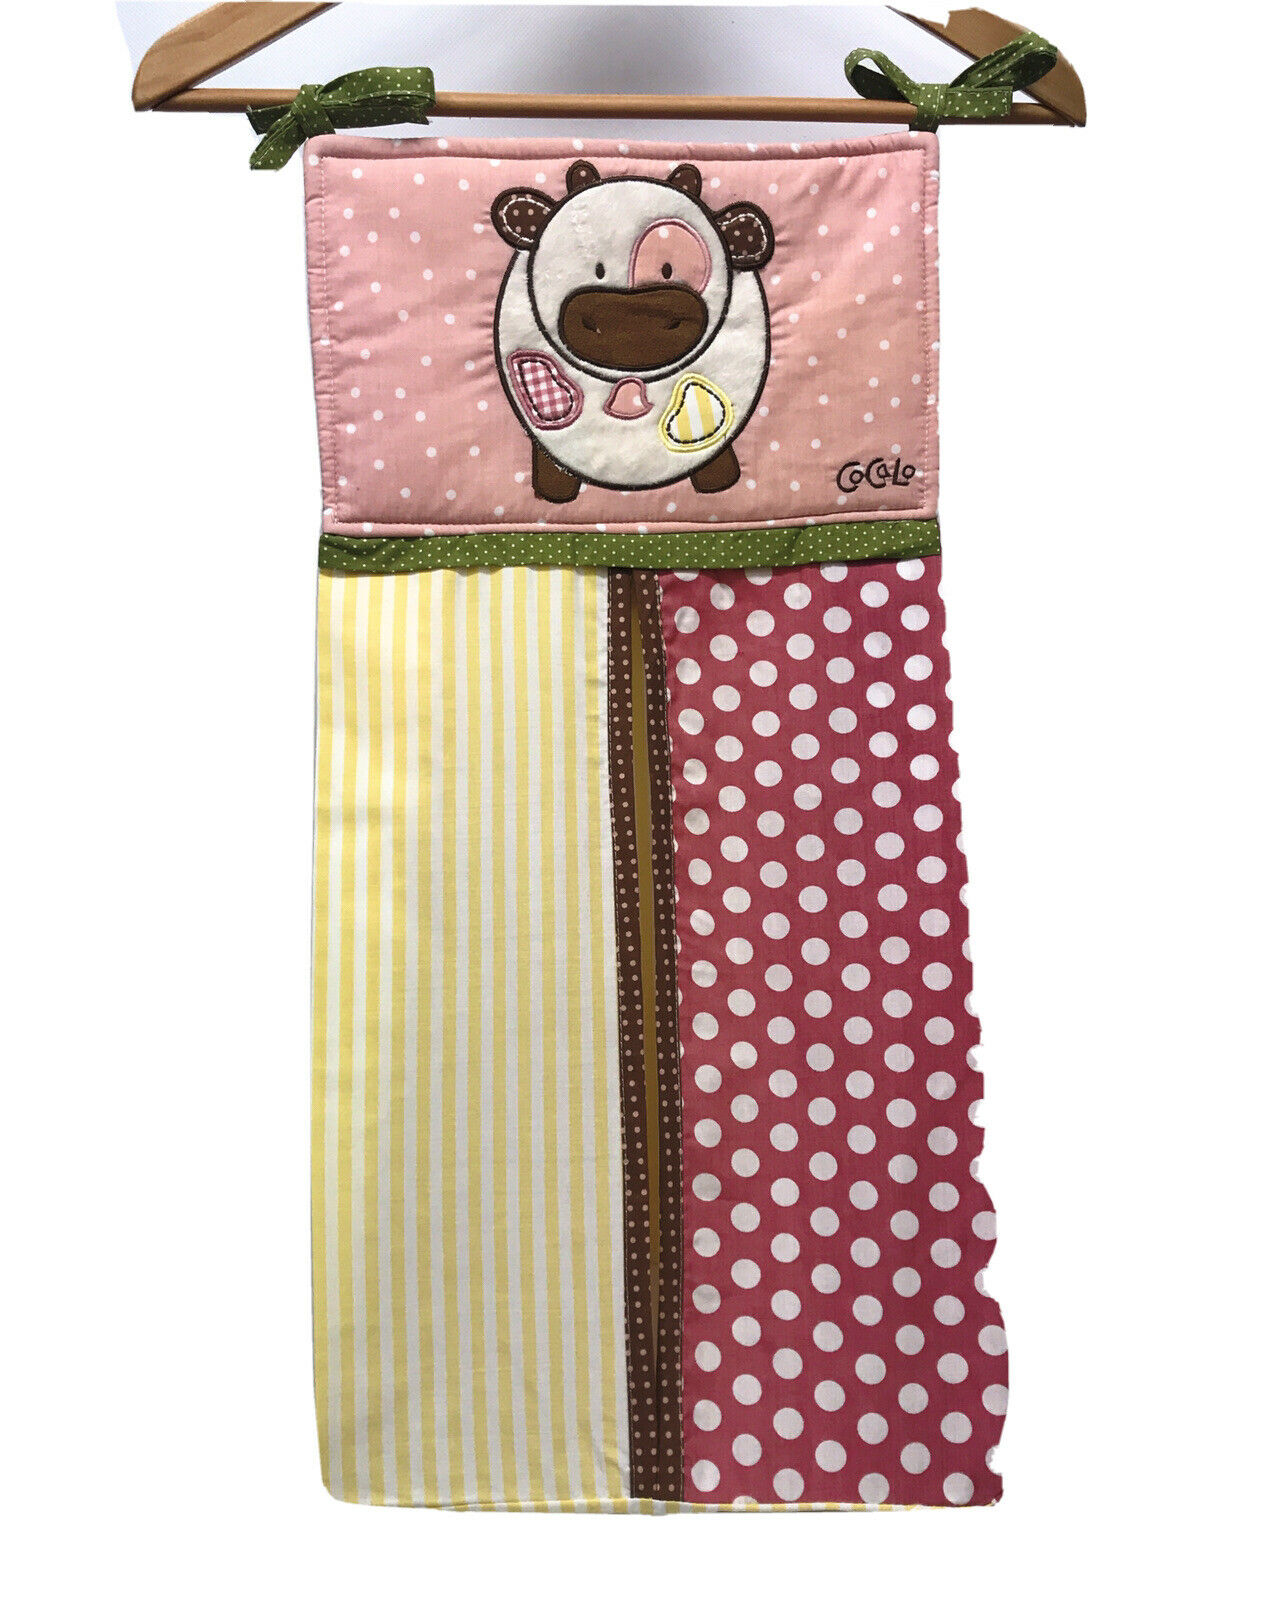 Cocalo Abbey's Farm Nursery Diaper Stacker Pink Bedding Baby Girl Used